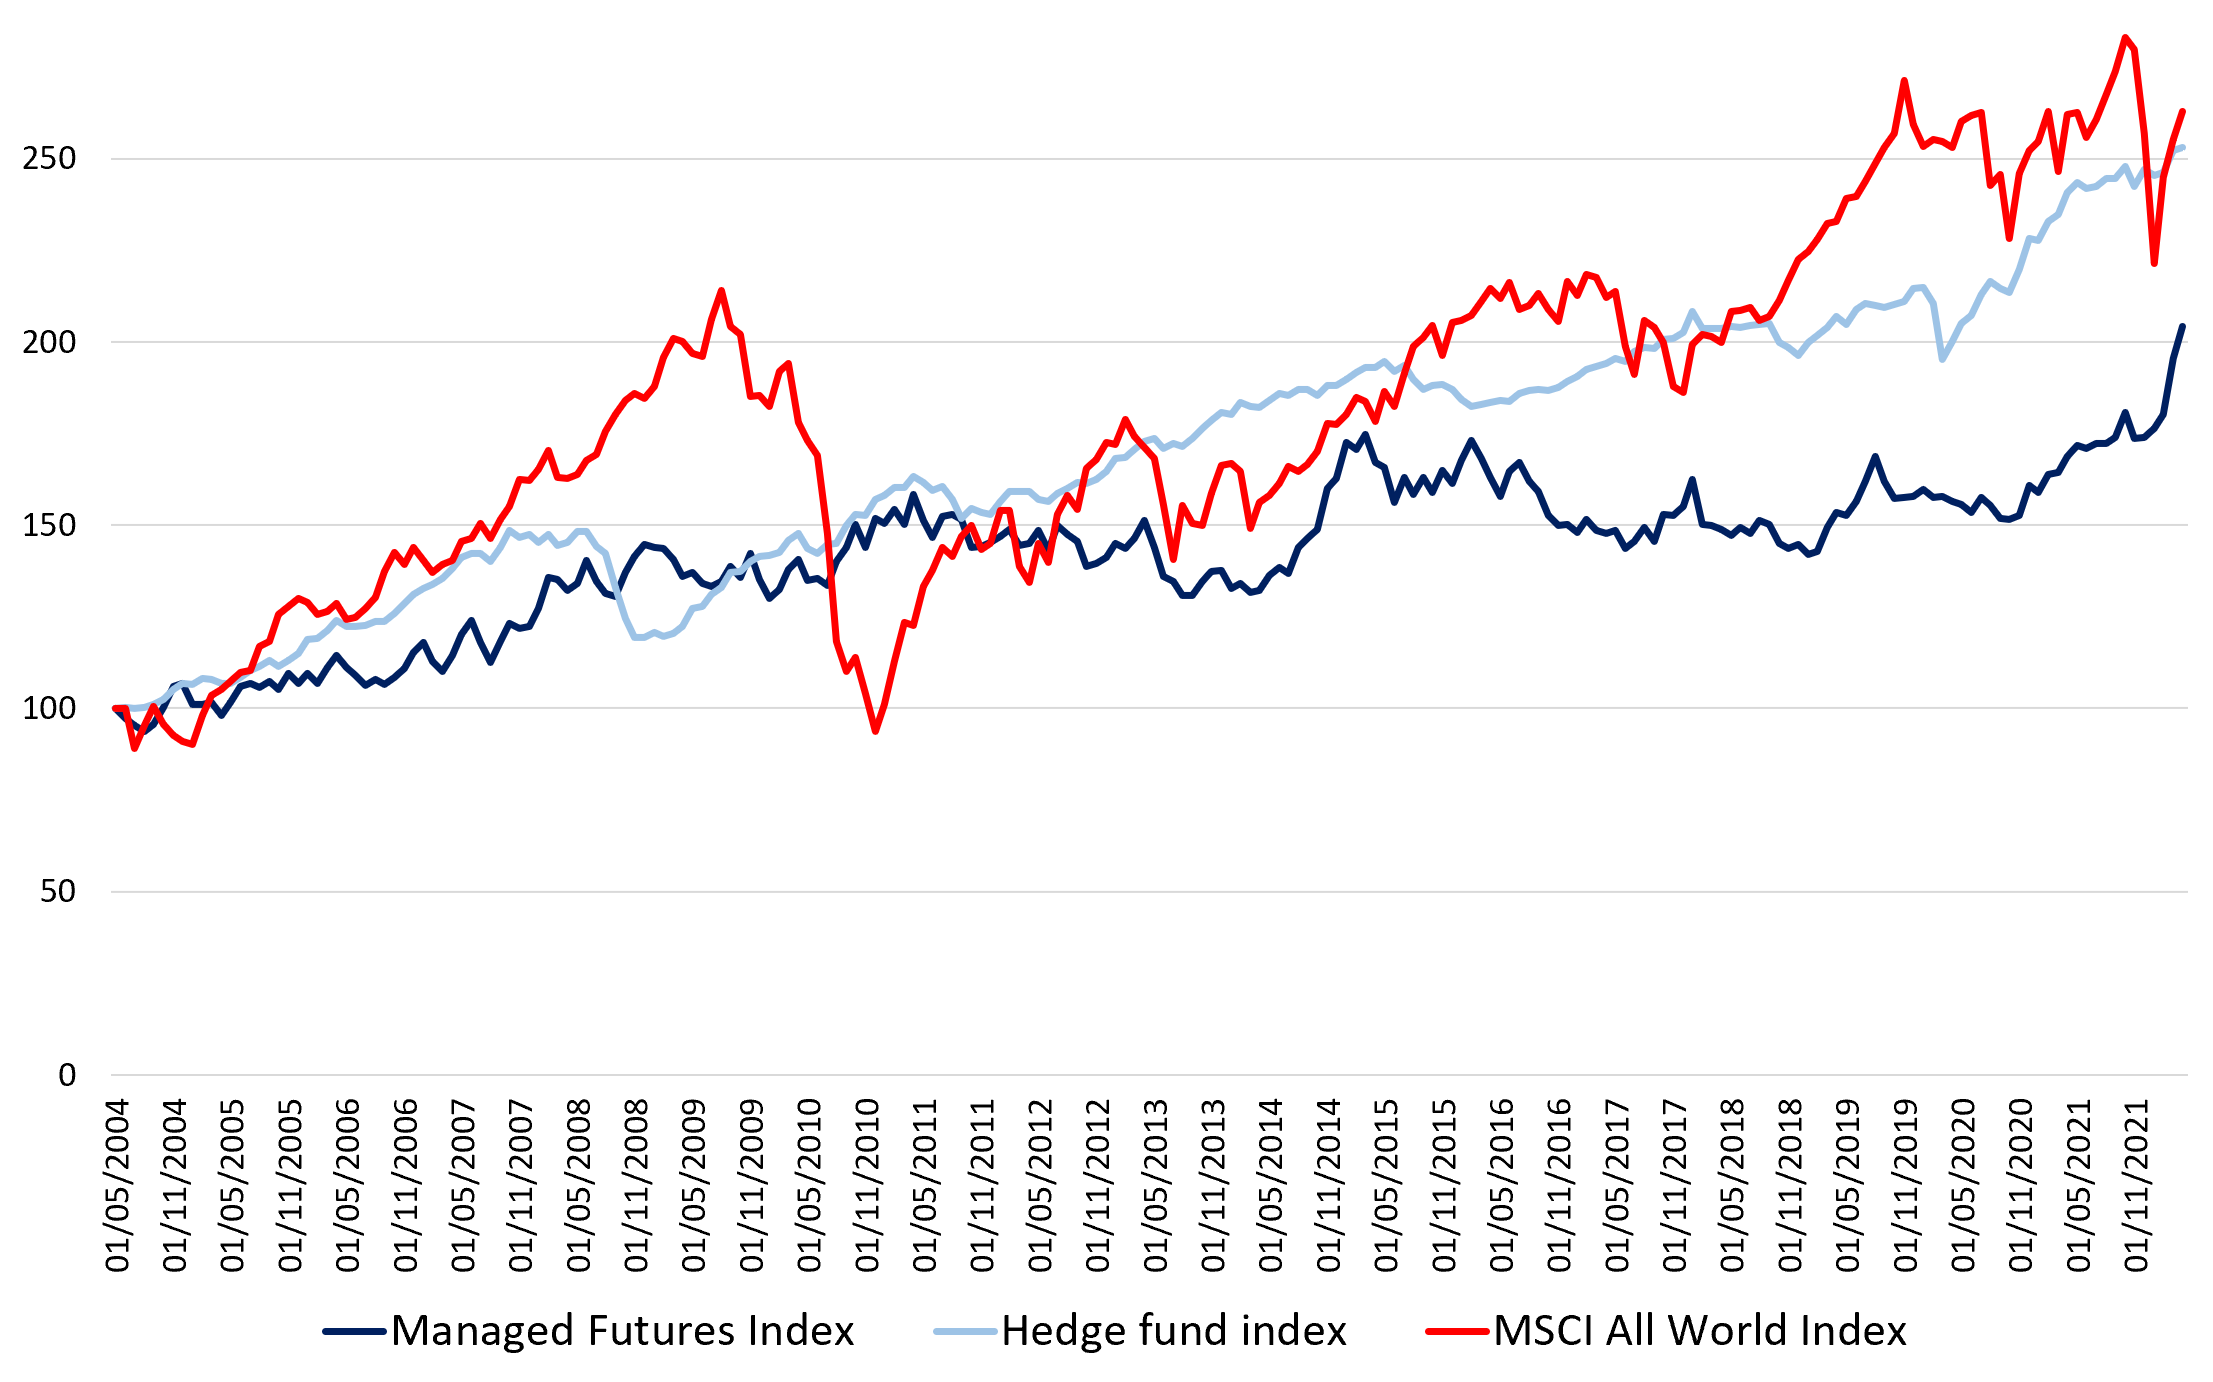 Performance of the managed futures strategy